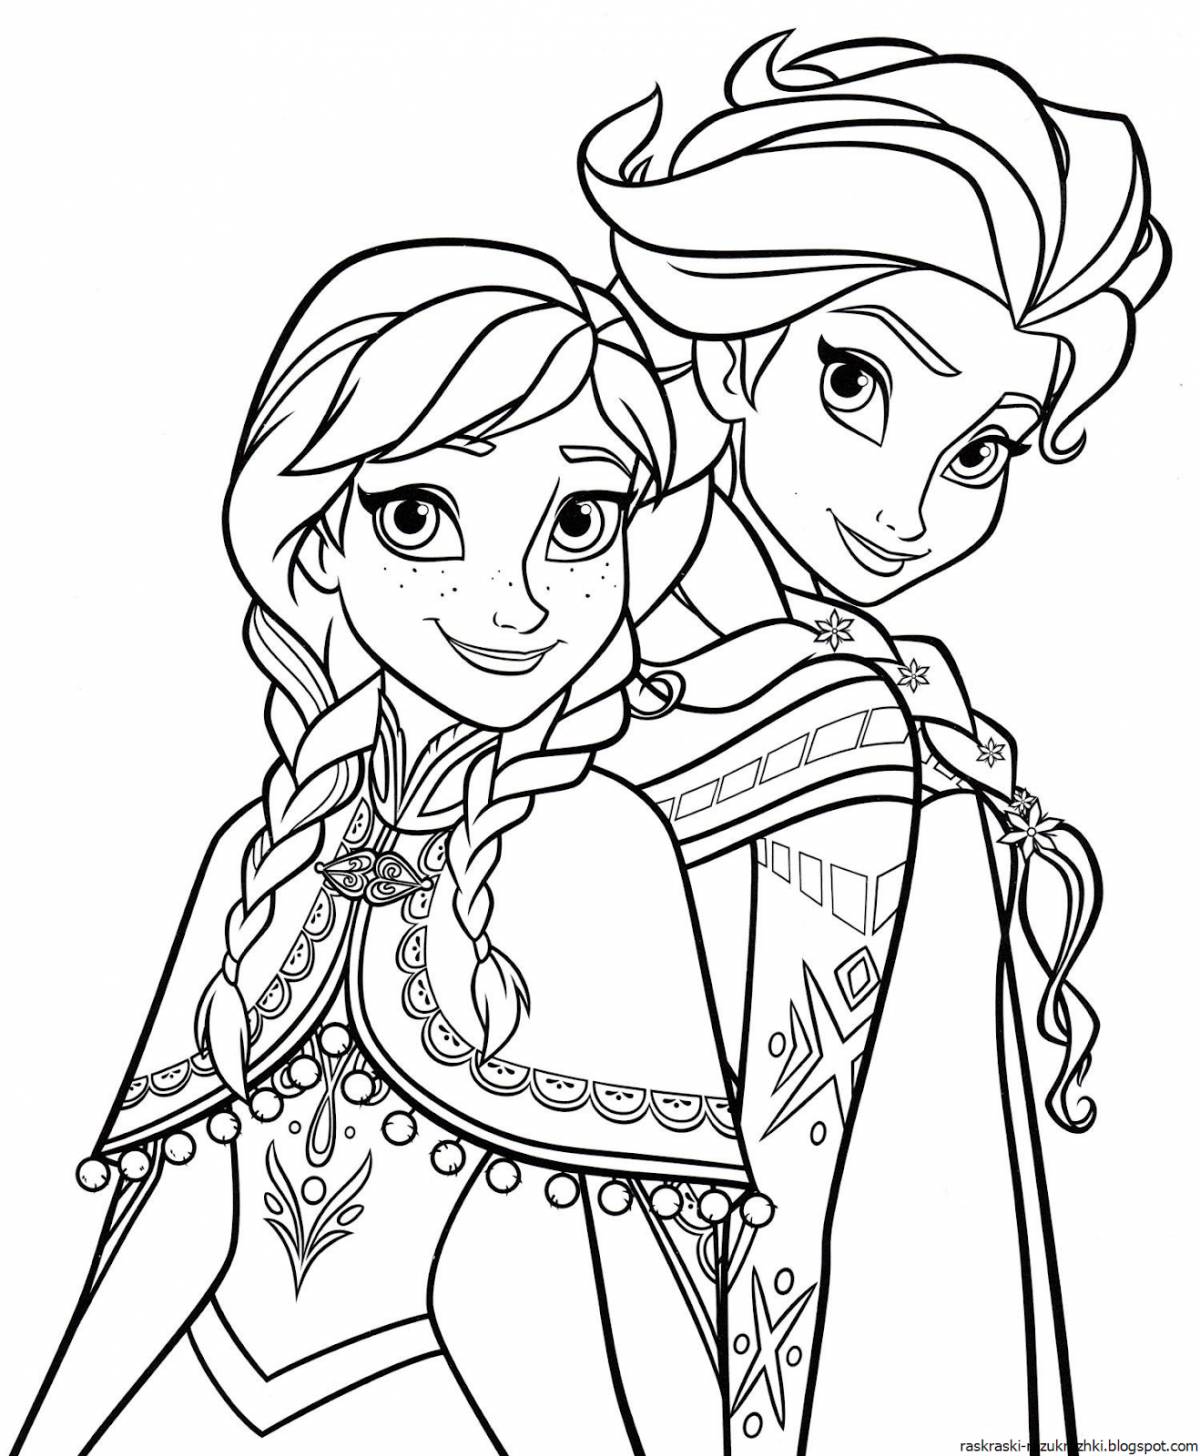 Colourful elsa and anna frozen coloring book